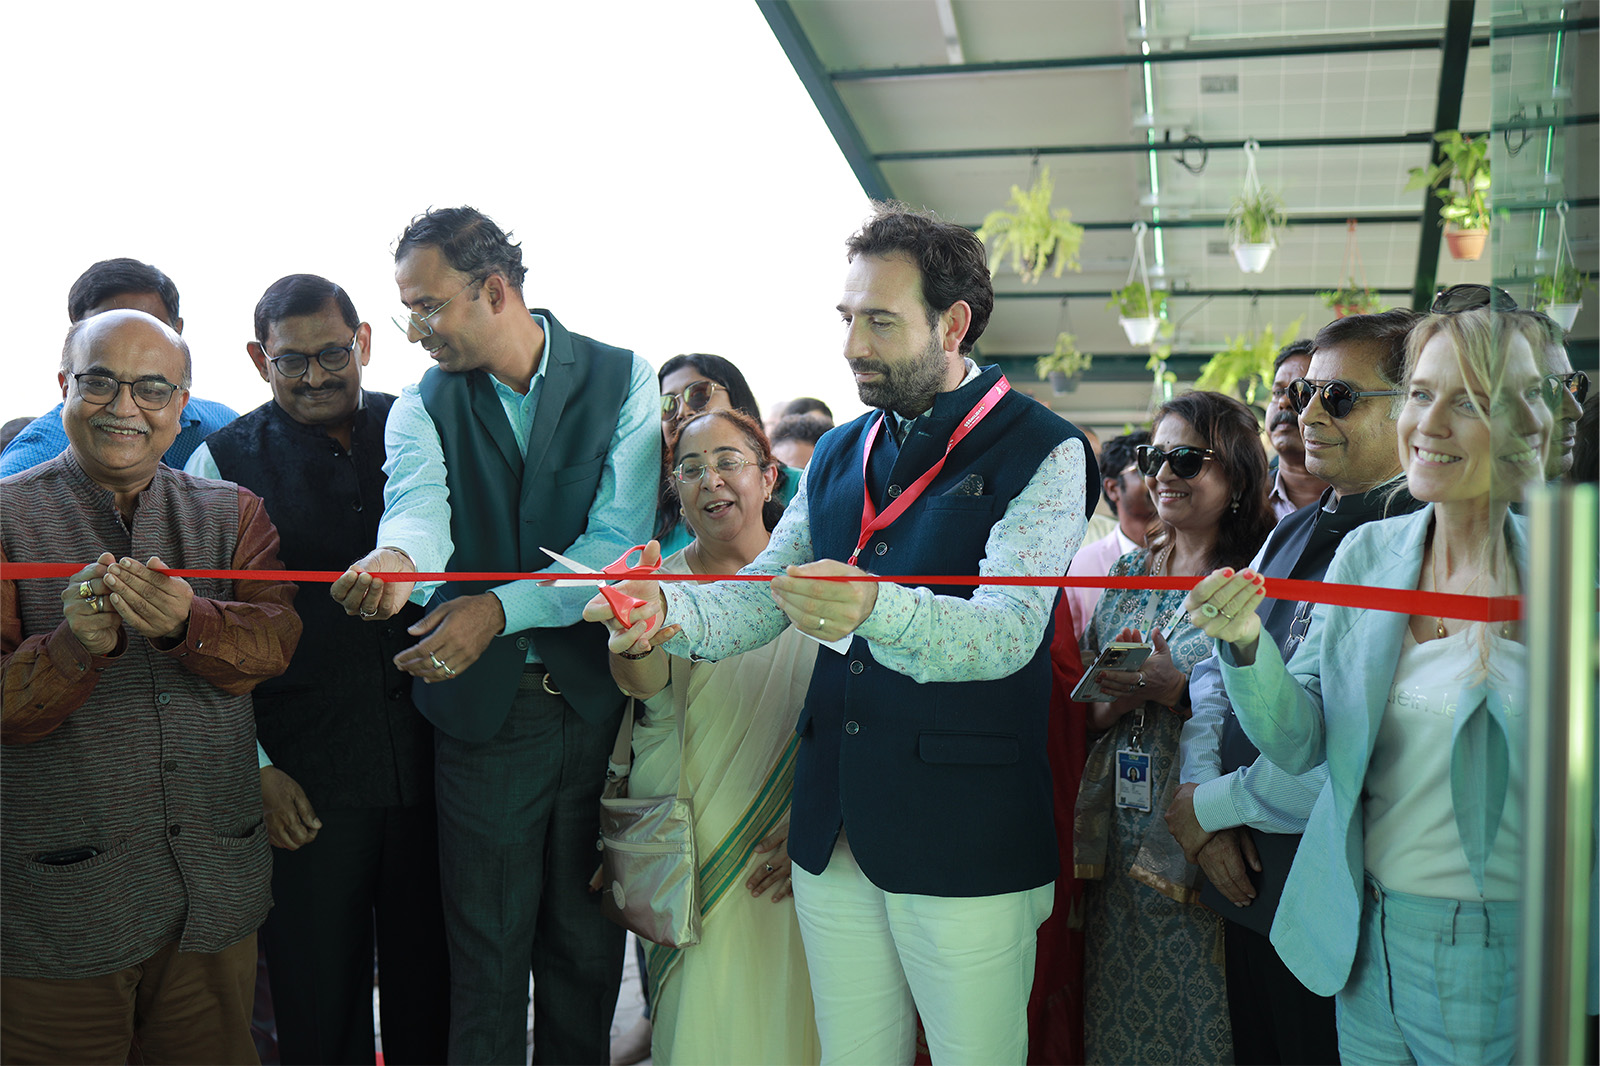 Dr. Jitendra Sharma, MD & Founder CEO of AMTZ, alongside Dr. Shirshendu Mukherjee, Mission Director of Grand Challenges India, and HaKob, during the inauguration of the STARTUP ARMENIA FOUNDATION office at AMTZ's advanced health and medical care technology campus in India